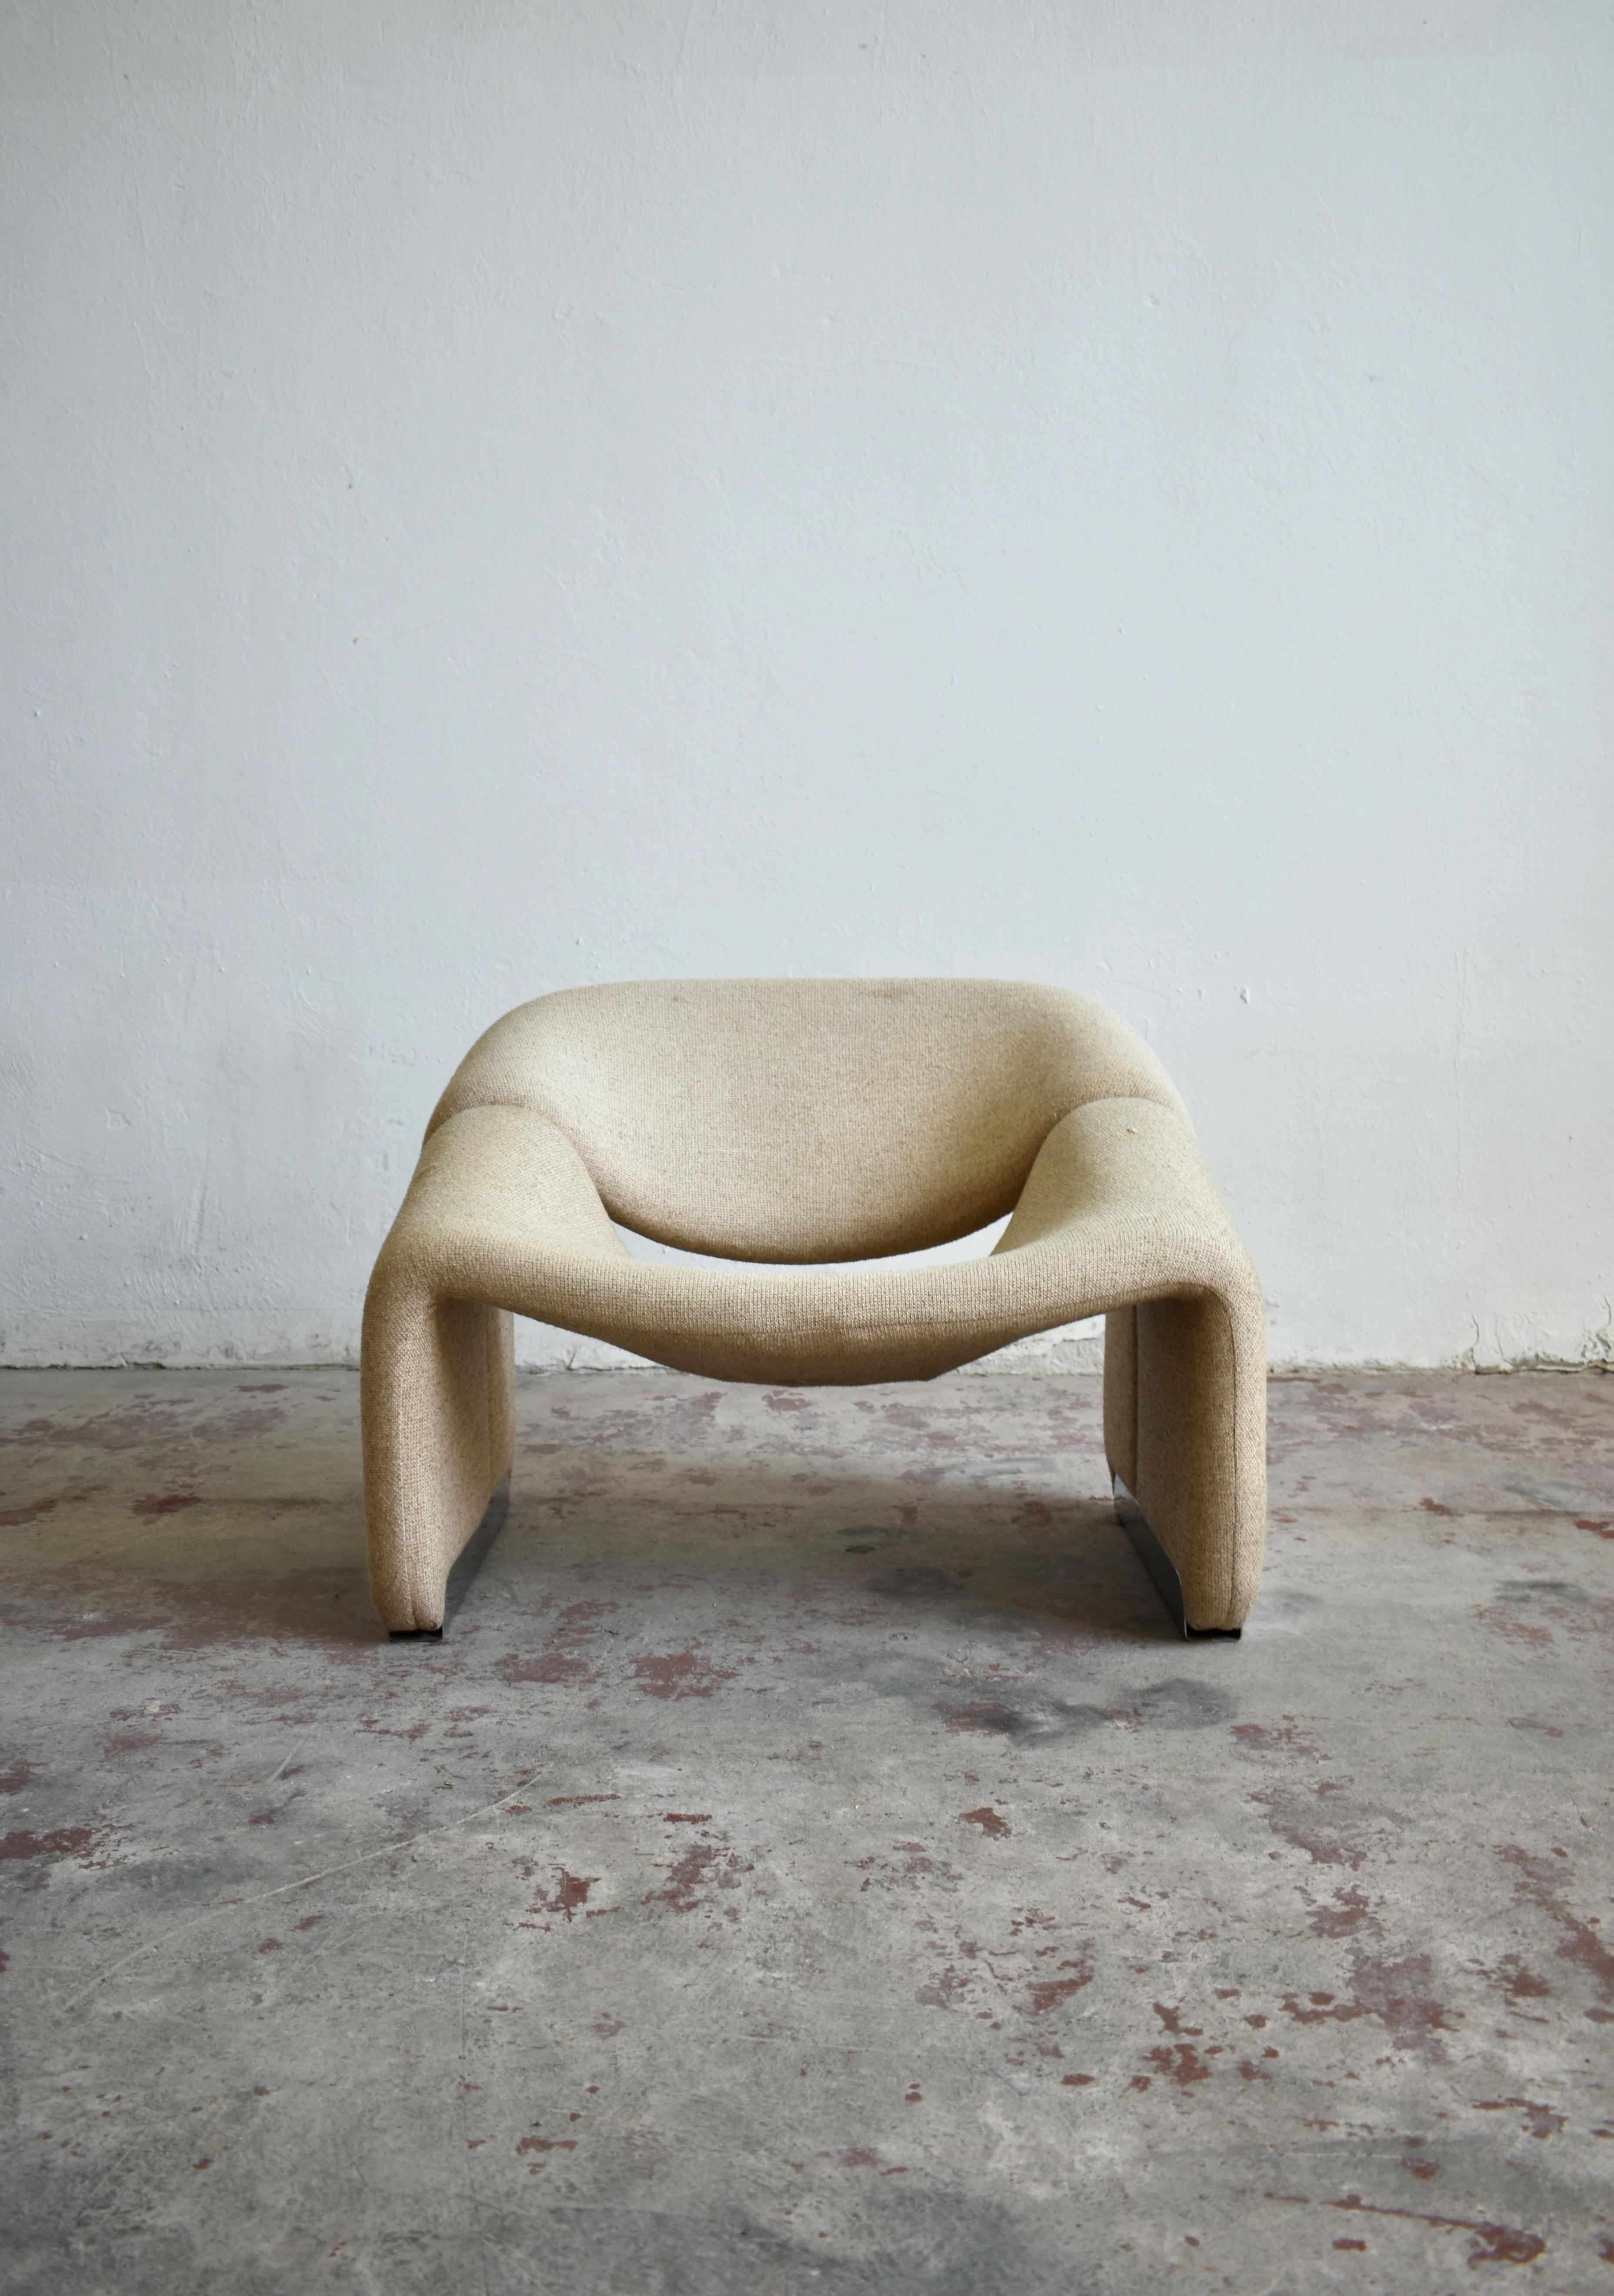 Iconic 1970s lounge chair 'Groovy' designed by French designer Pierre Paulin for Artifort.

The chair is in original condition, upholstered in beige color wool fabric with few visible traces of tear and wear
  